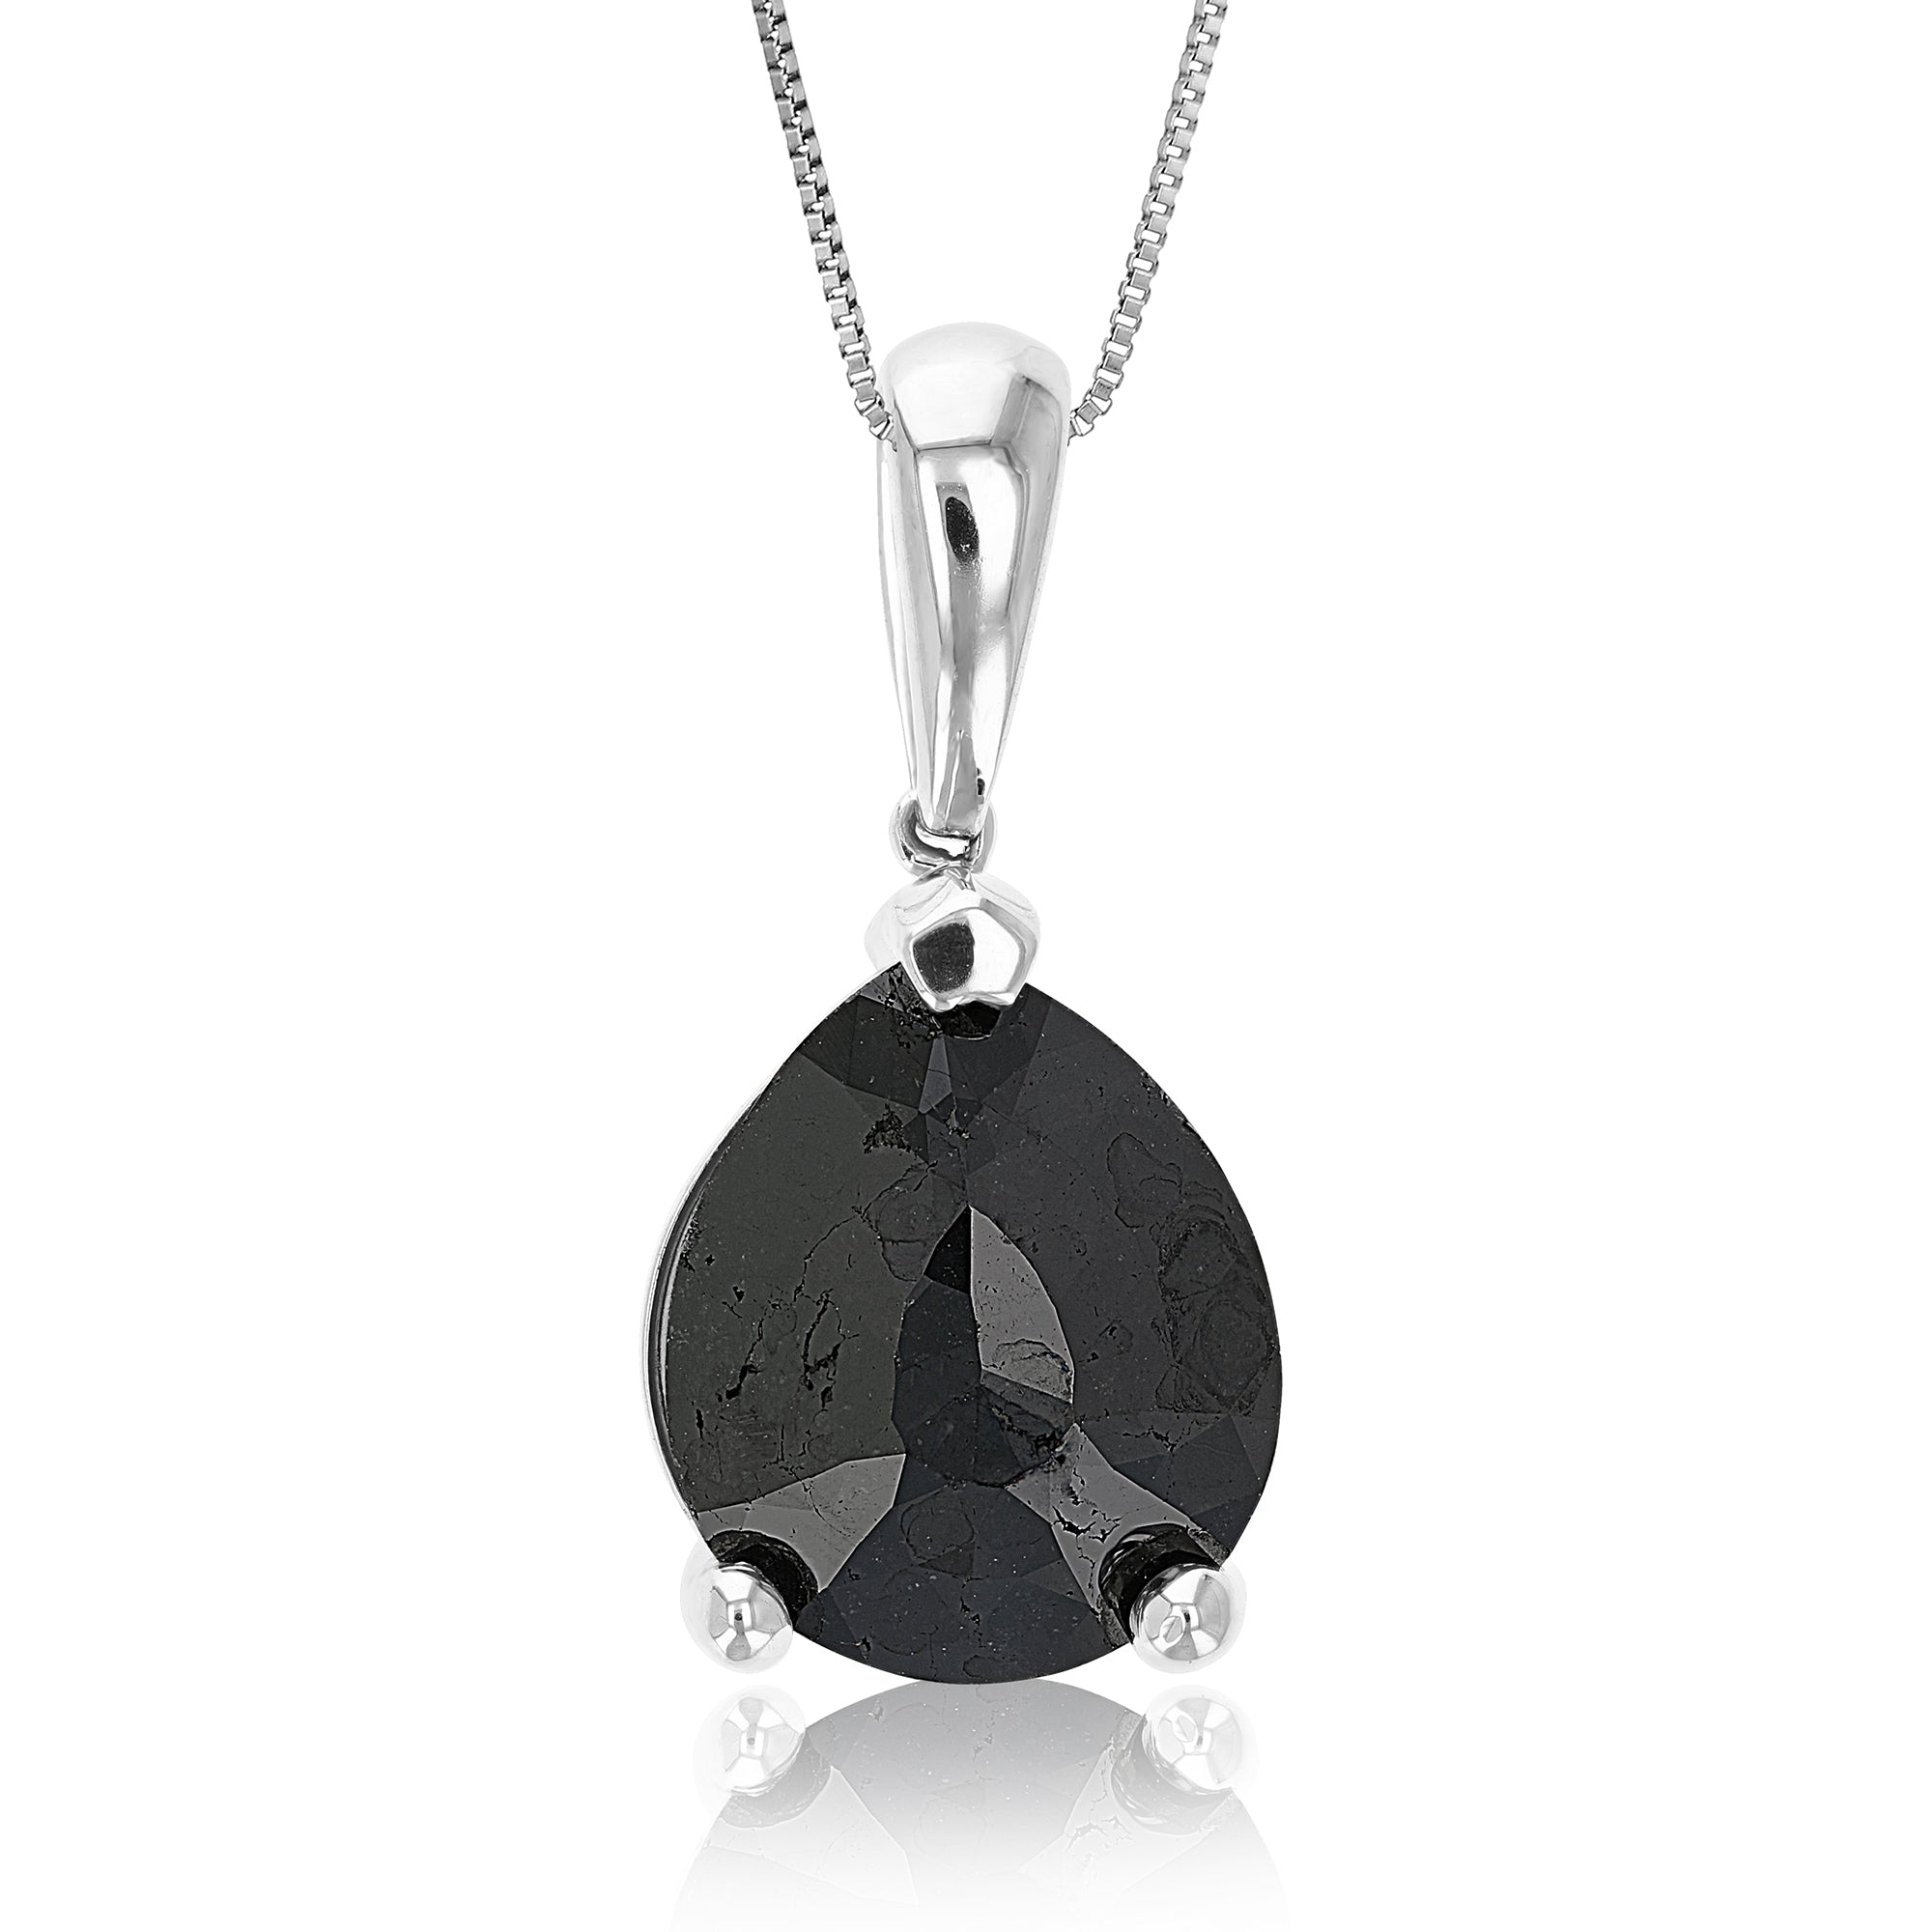 3 cttw Diamond Pendant, Black Diamond Pear Shape Pendant Necklace for Women in .925 Sterling Silver with 18 Inch Chain, Prong Setting